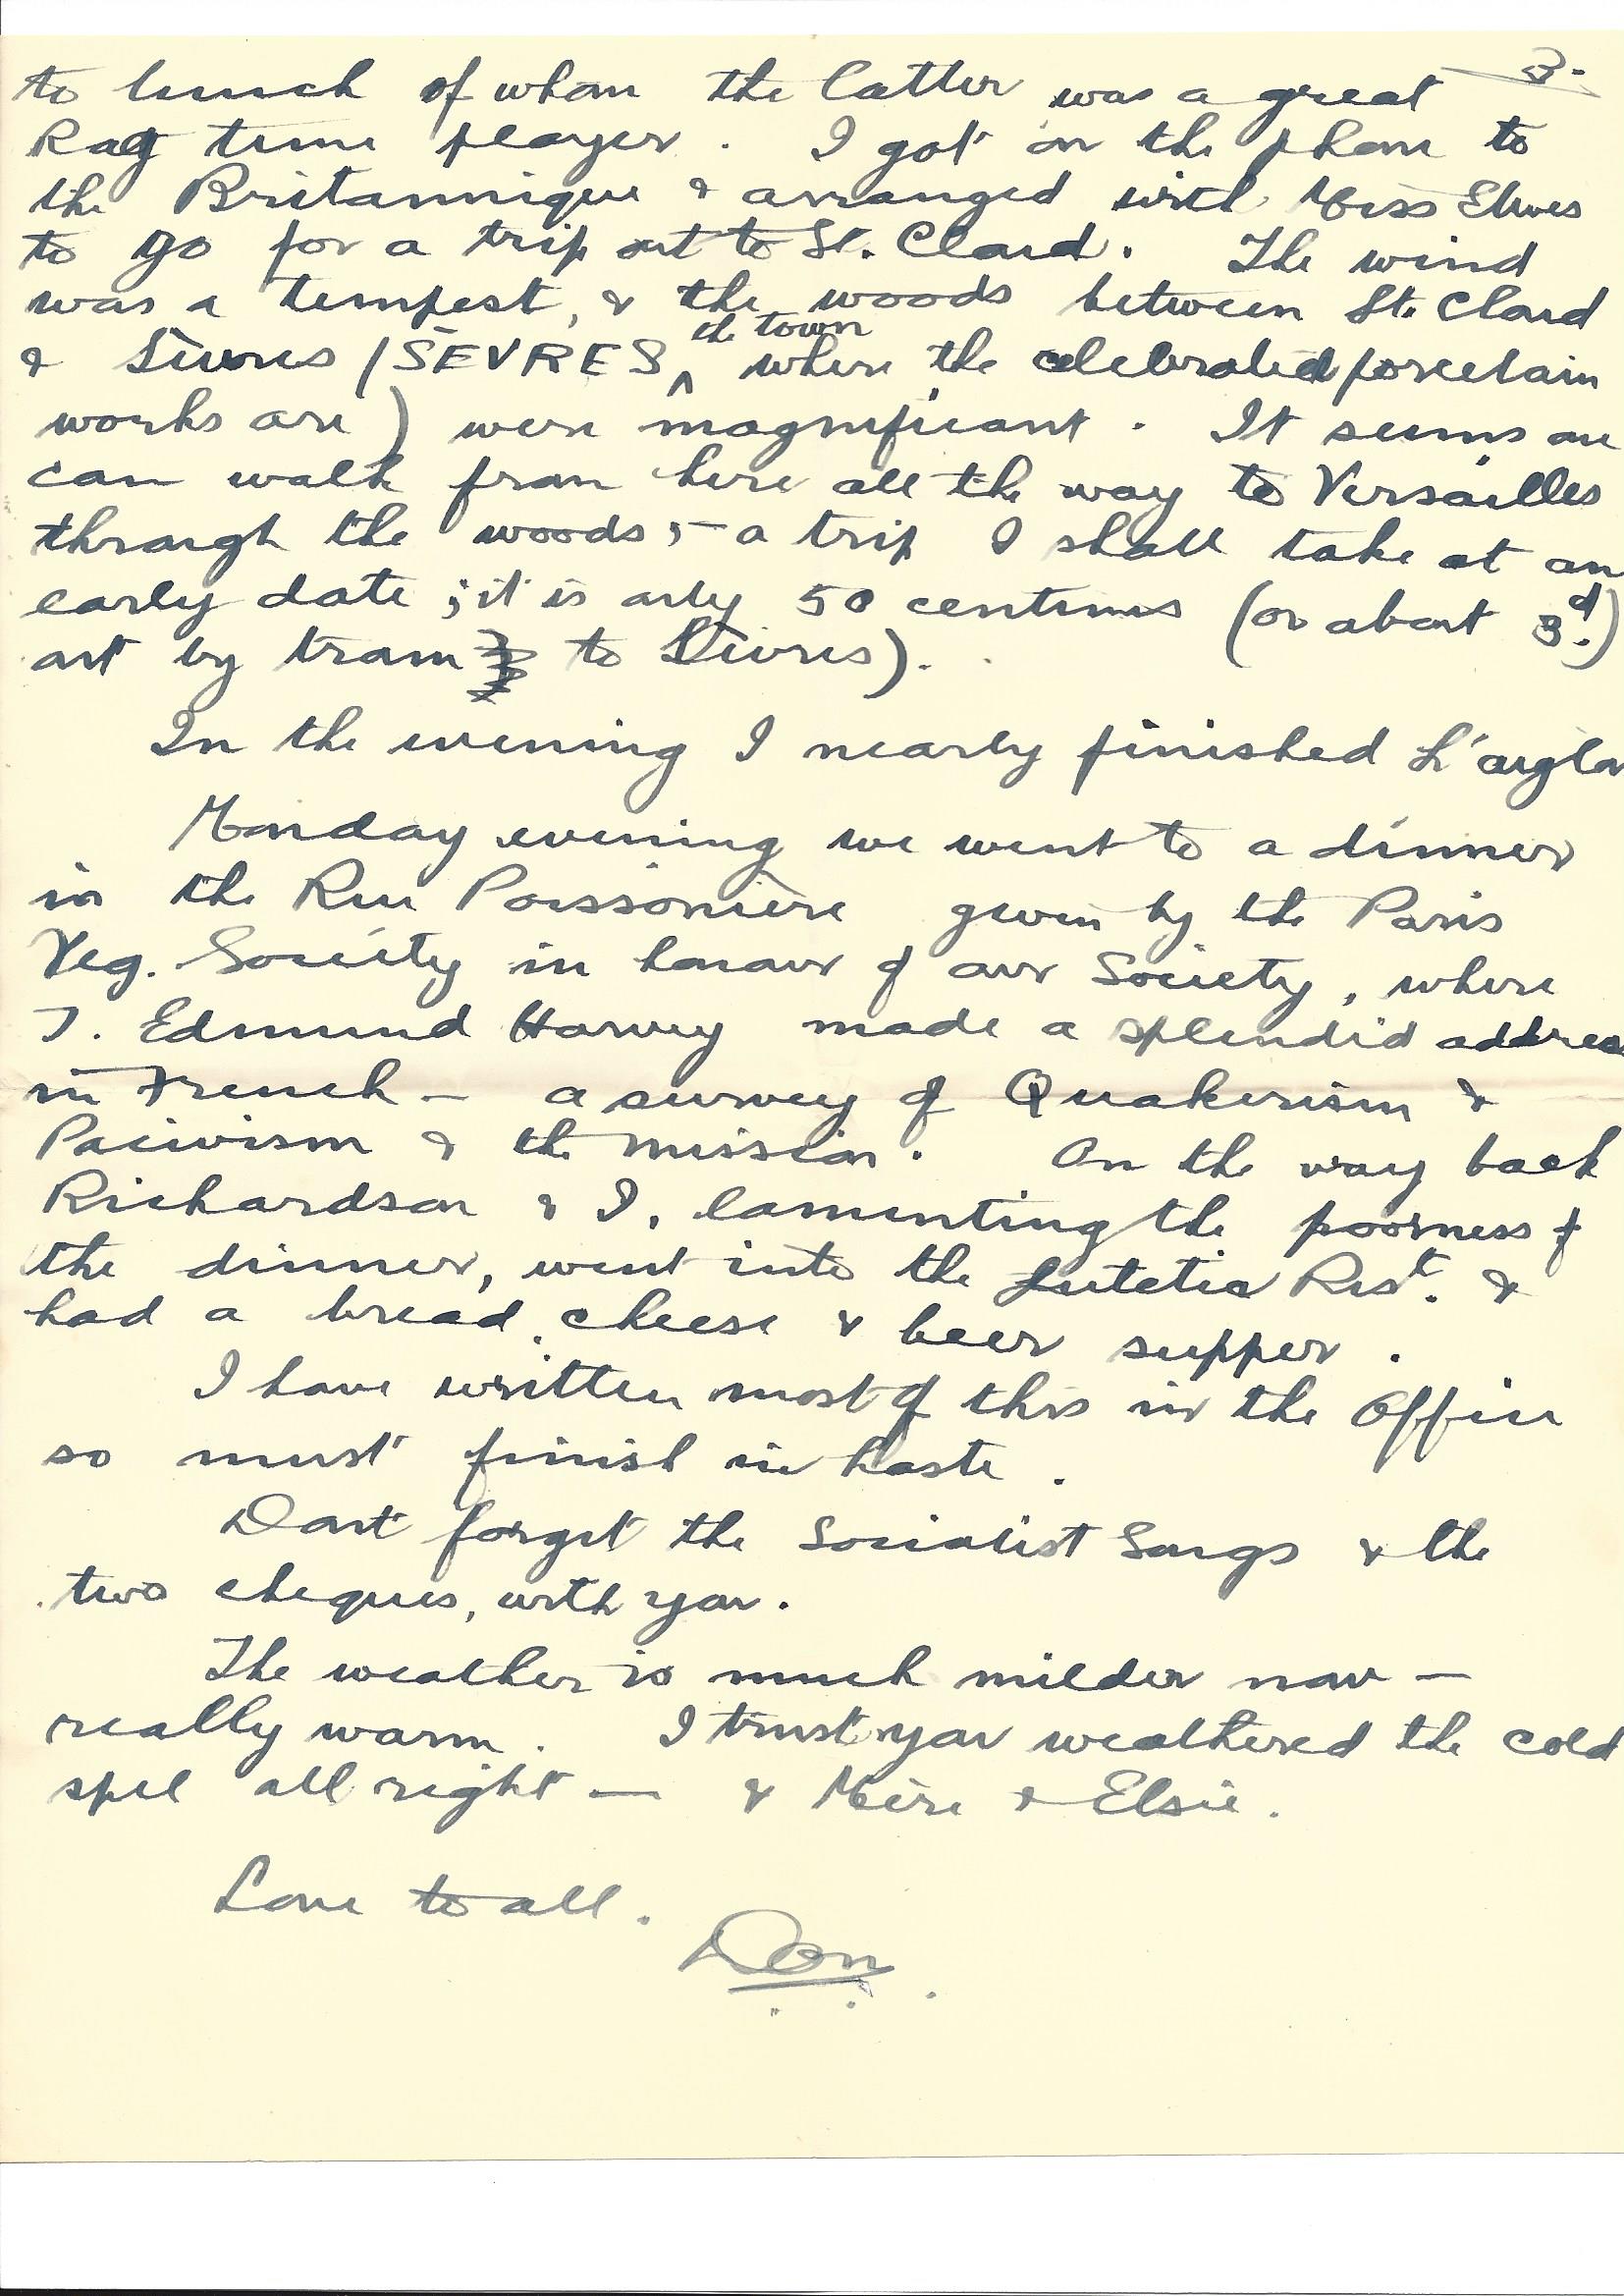 1920-01-11 page 4 letter by Donald Bearman